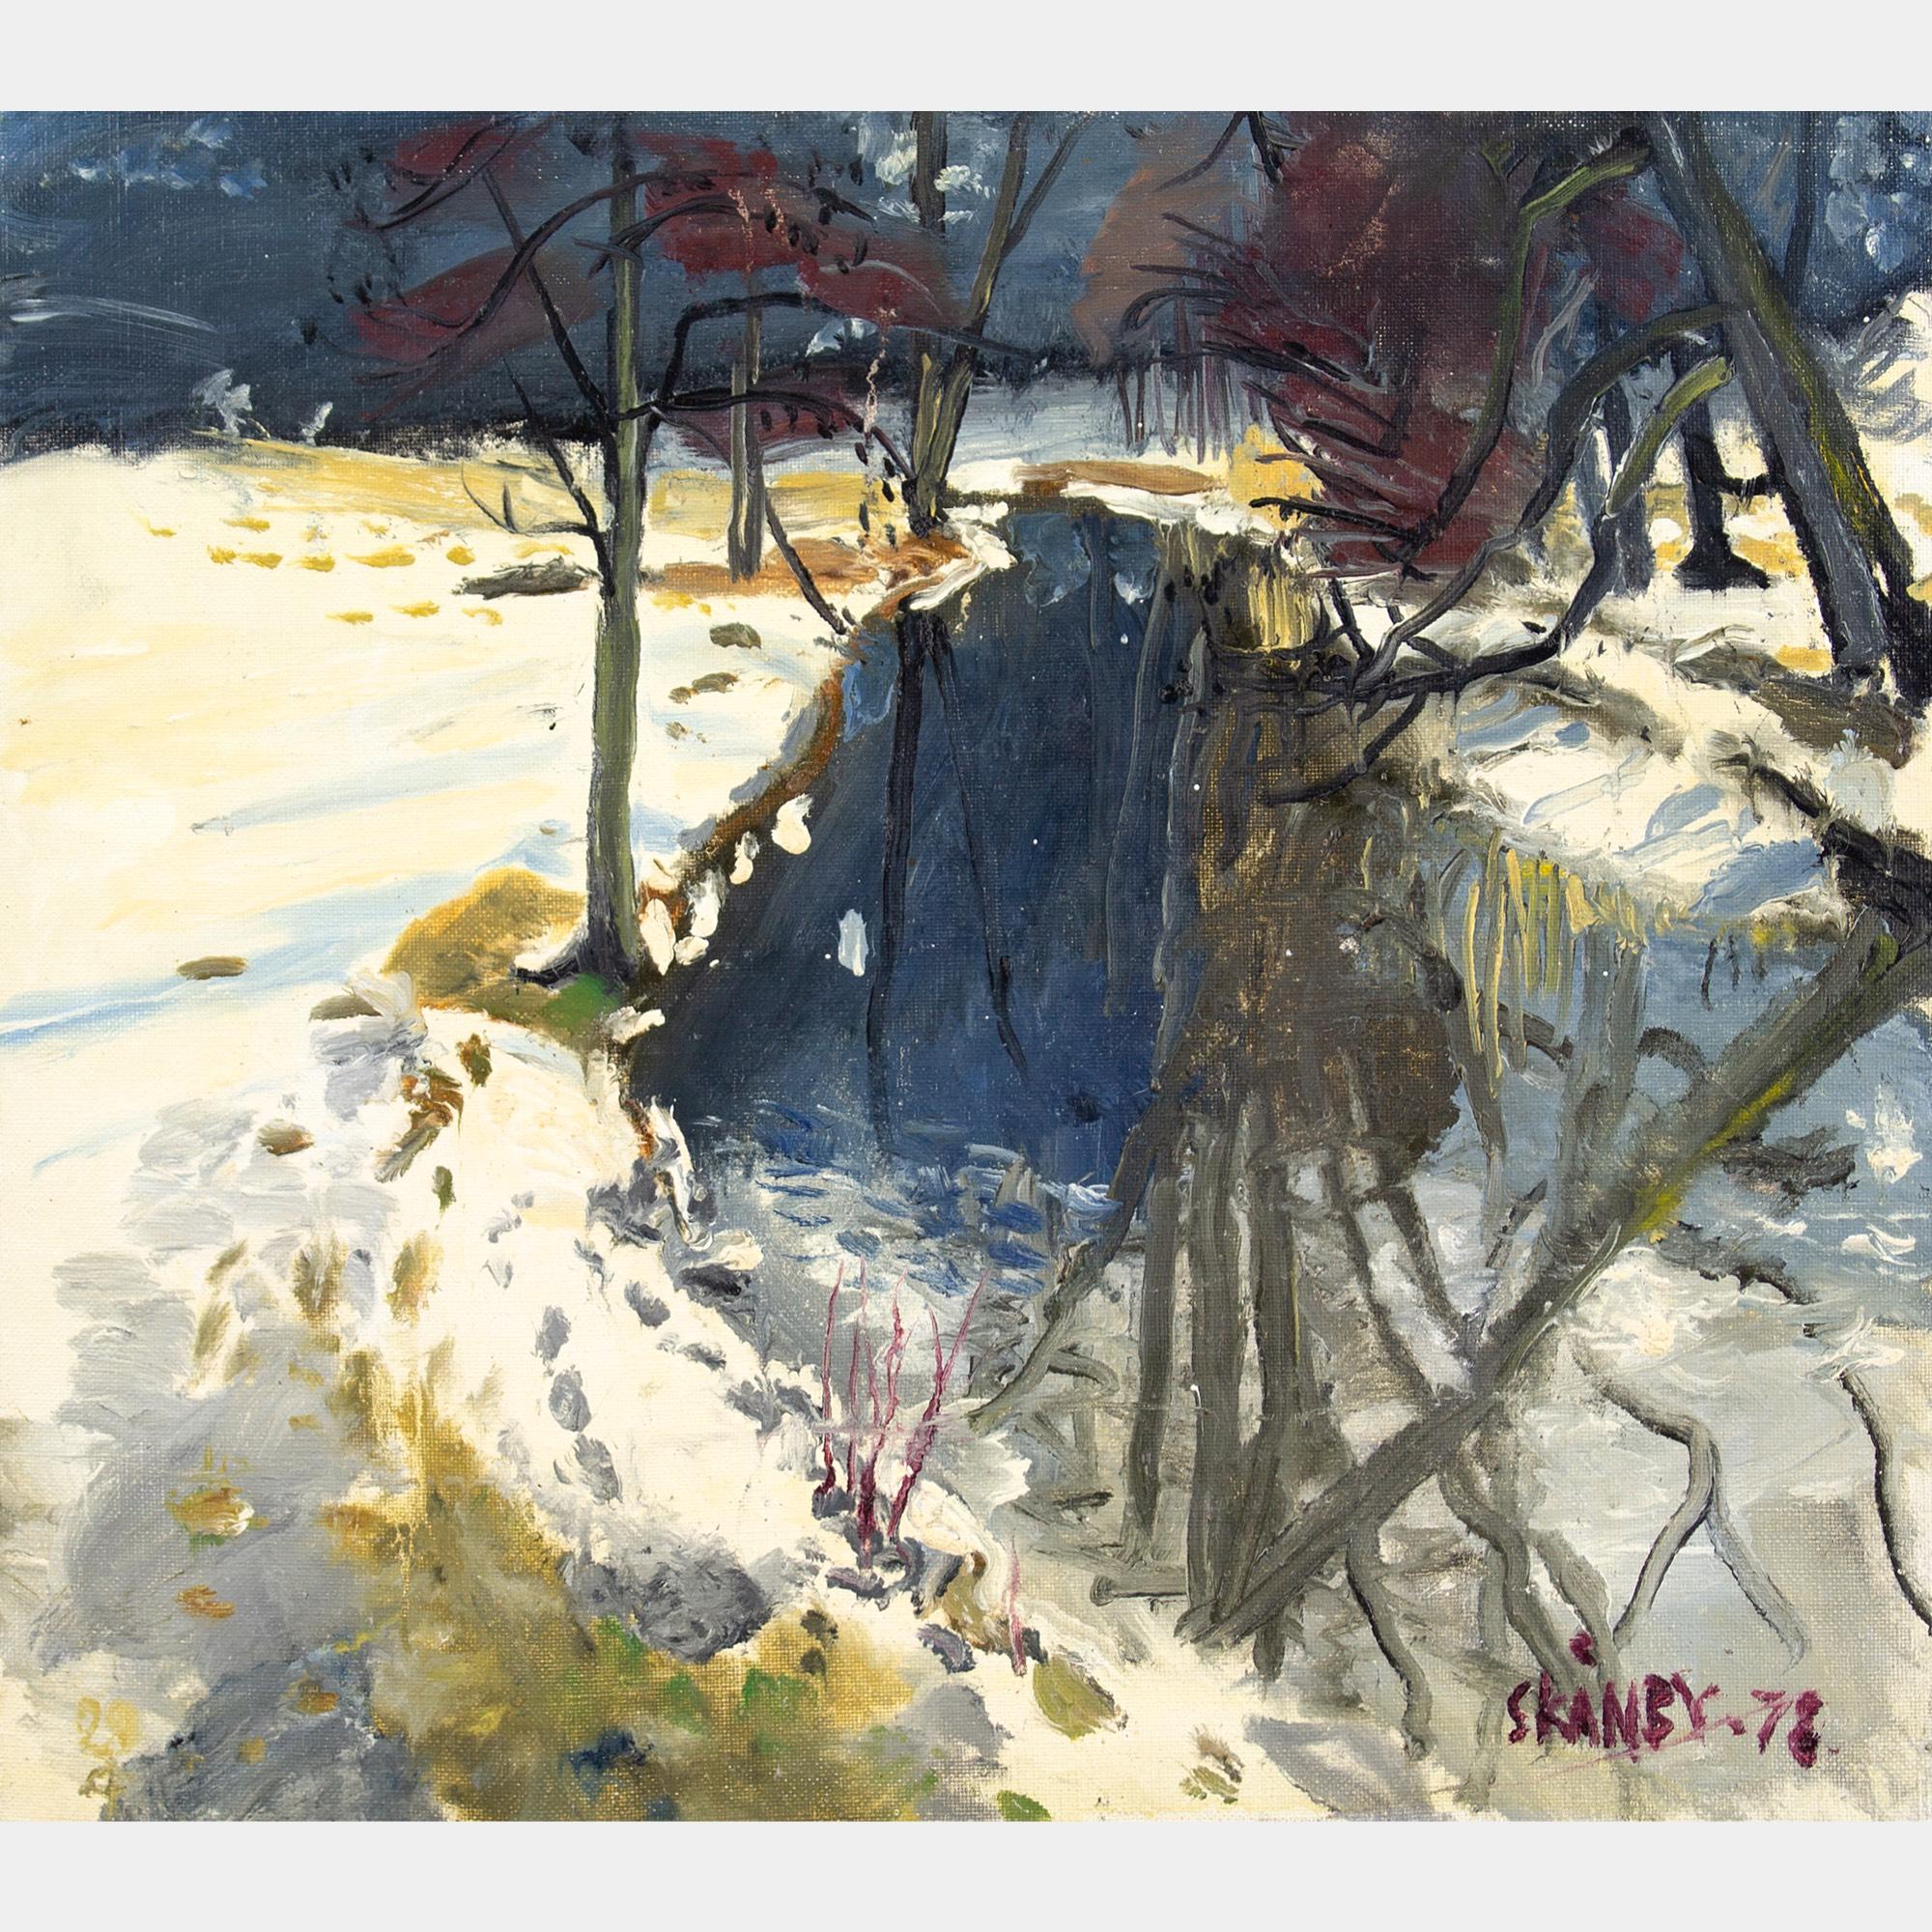 Gunnar Skanby, Snow-Covered Landscape With River, Vintage Oil Painting For Sale 1